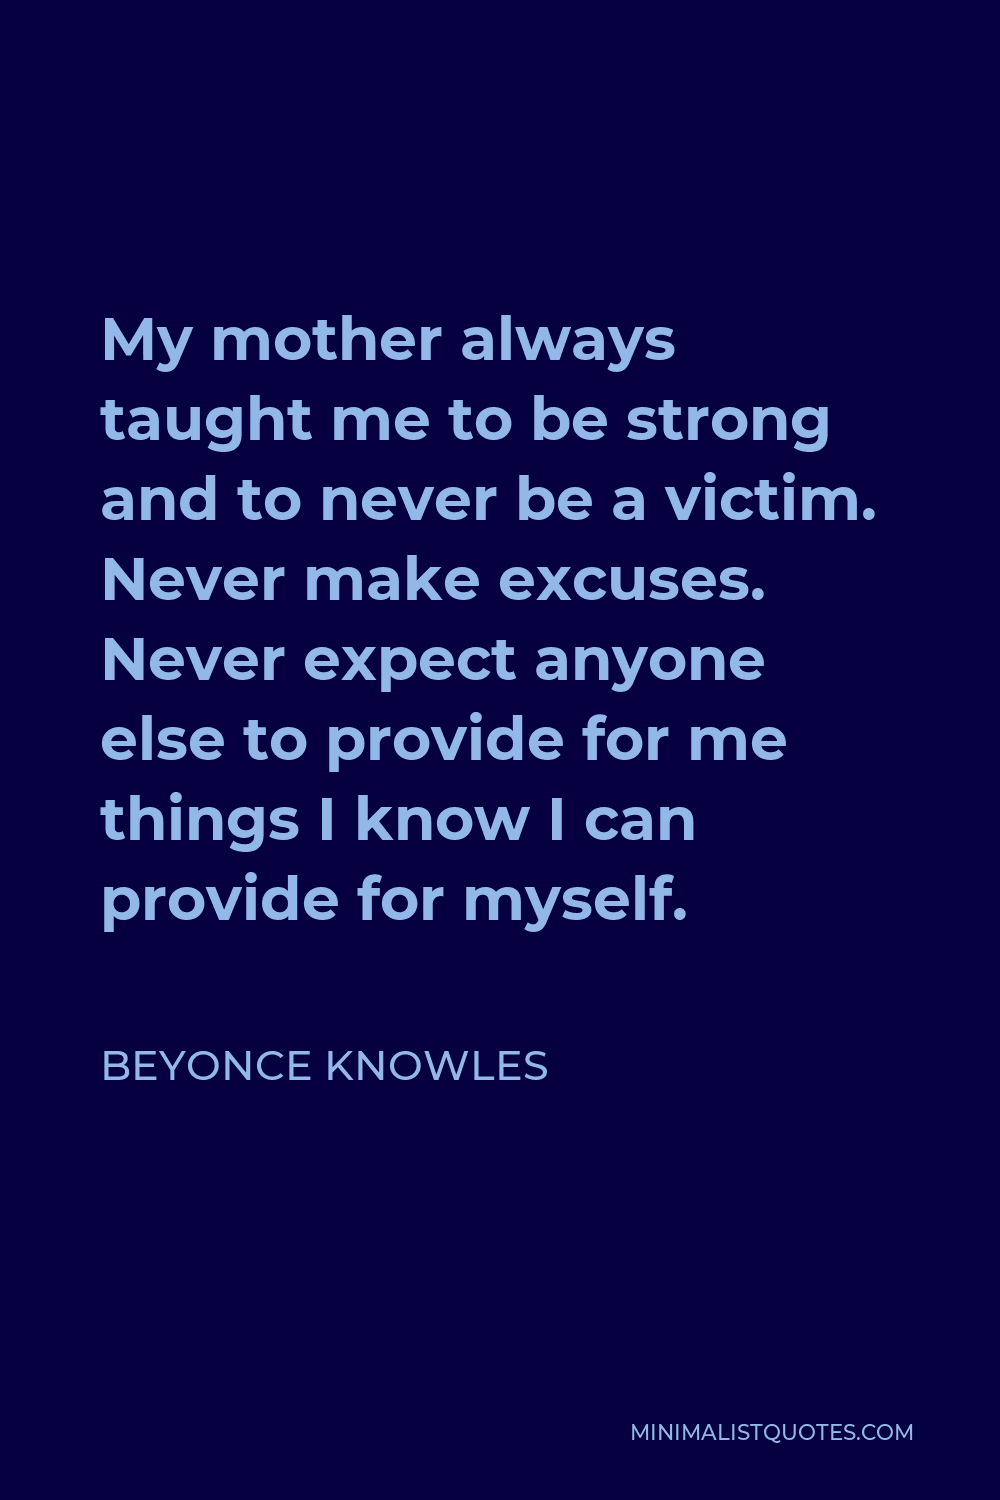 Beyonce Knowles Quote - My mother always taught me to be strong and to never be a victim. Never make excuses. Never expect anyone else to provide for me things I know I can provide for myself.